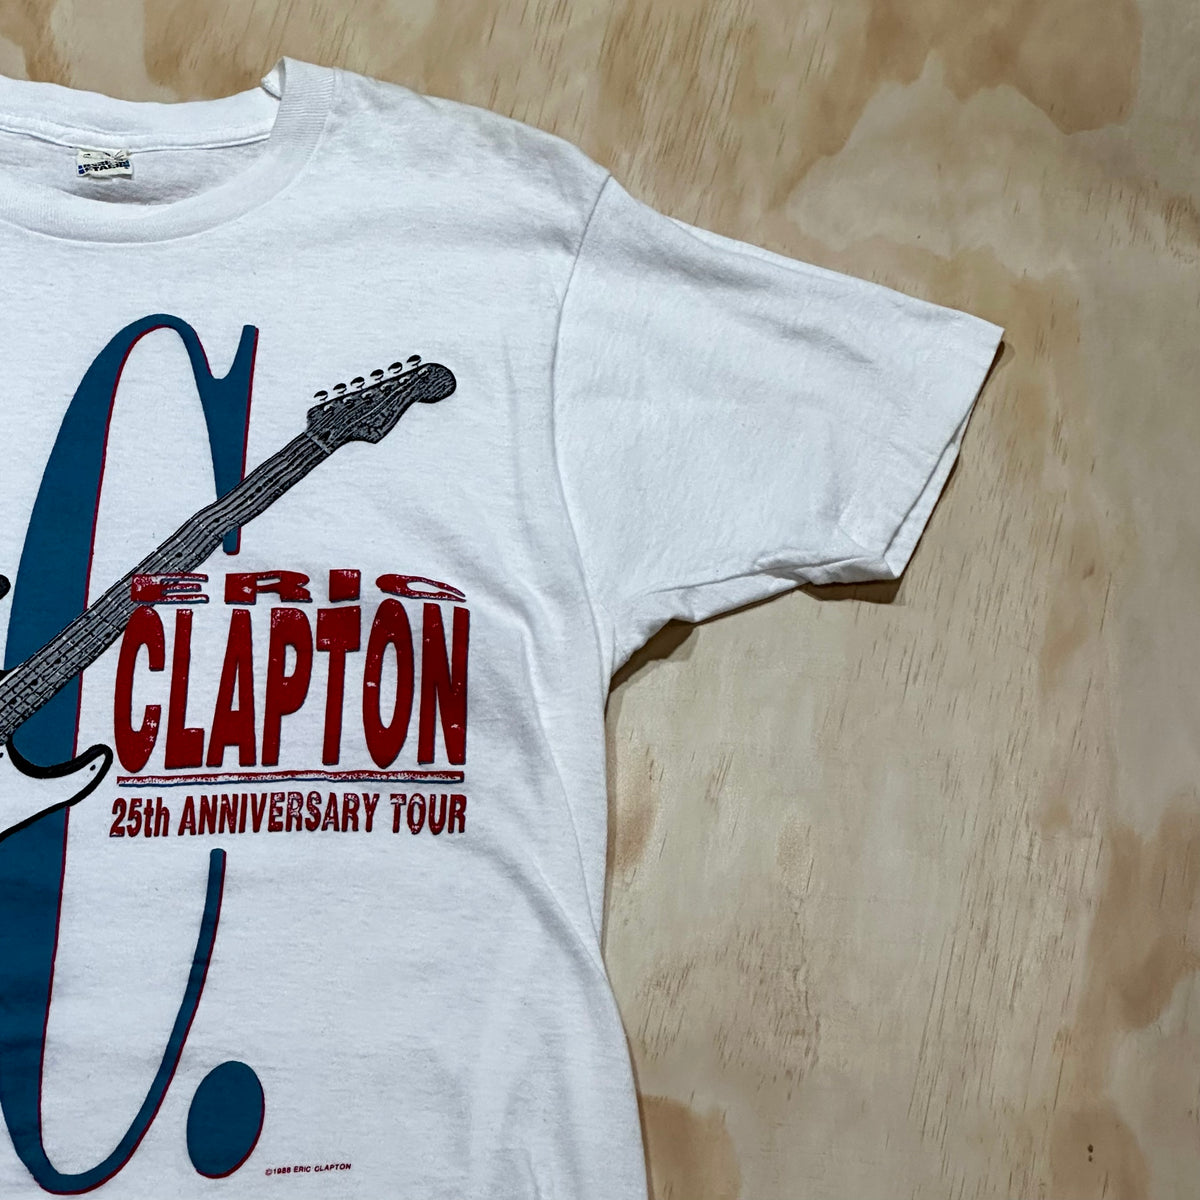 Vintage 80s Eric Clapton 25th Anniversary T-Shirt from 1988